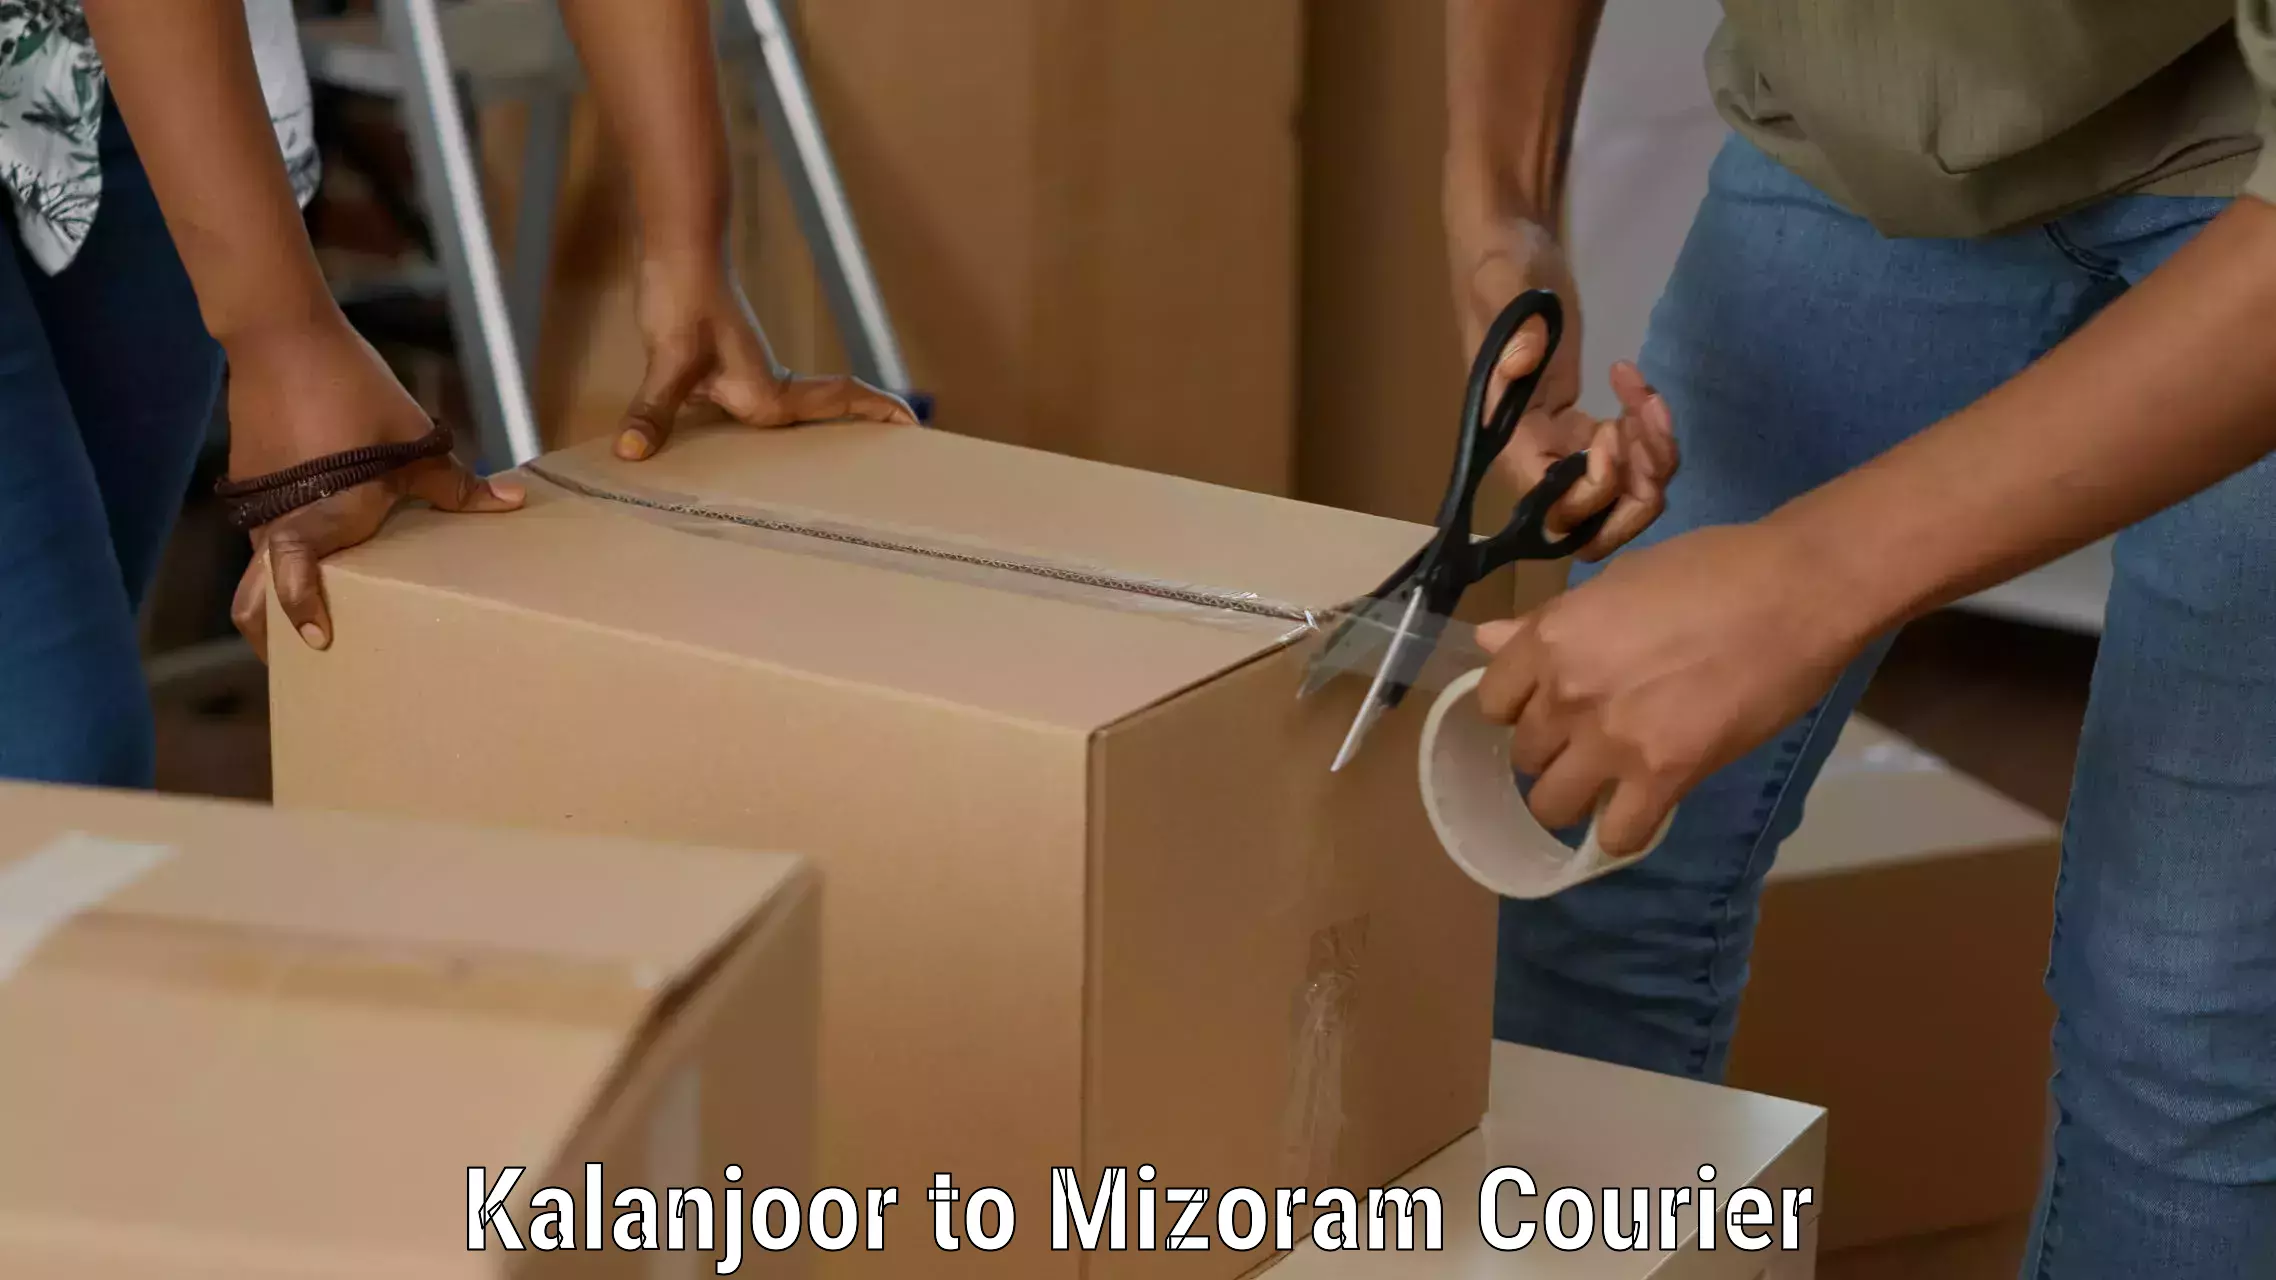 State-of-the-art courier technology Kalanjoor to Hnahthial